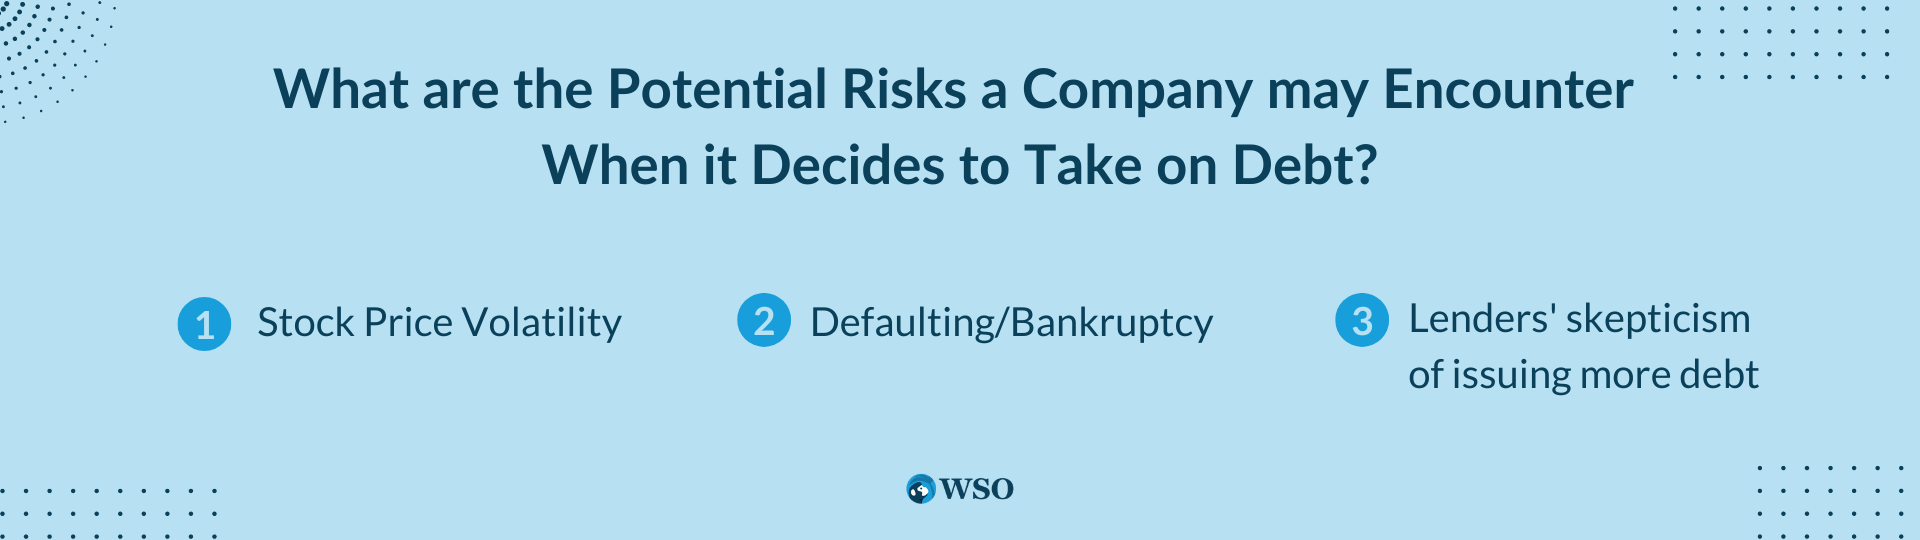 What are the Potential Risks a Company may Encounter When it Decides to Take on Debt?